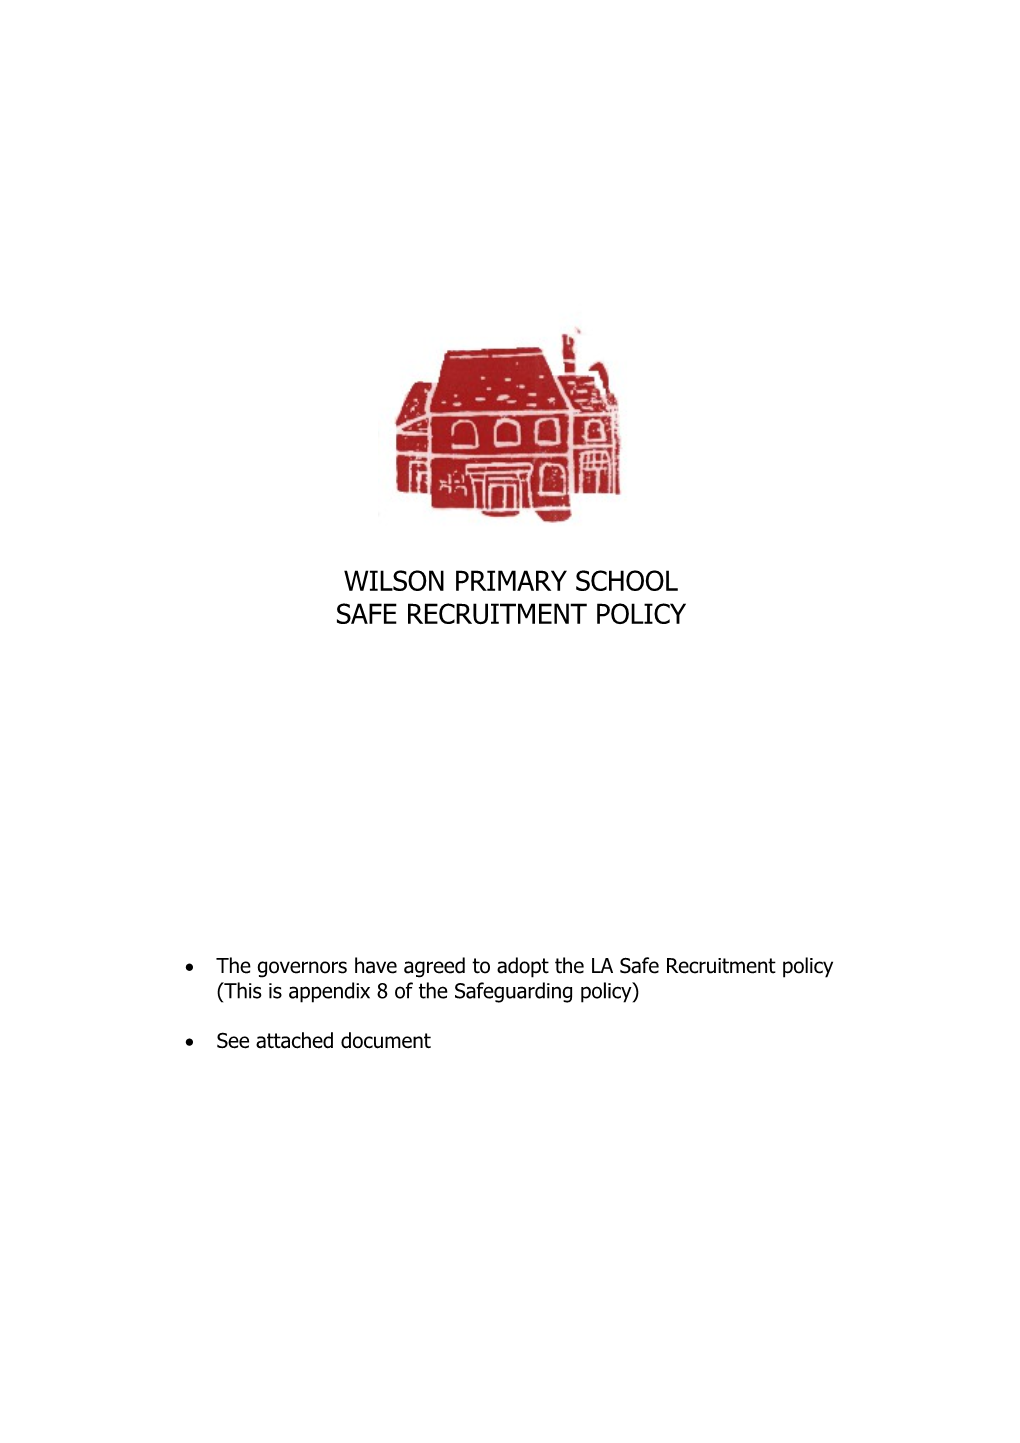 Recruitment and Selection Policy for Schools - January 2007